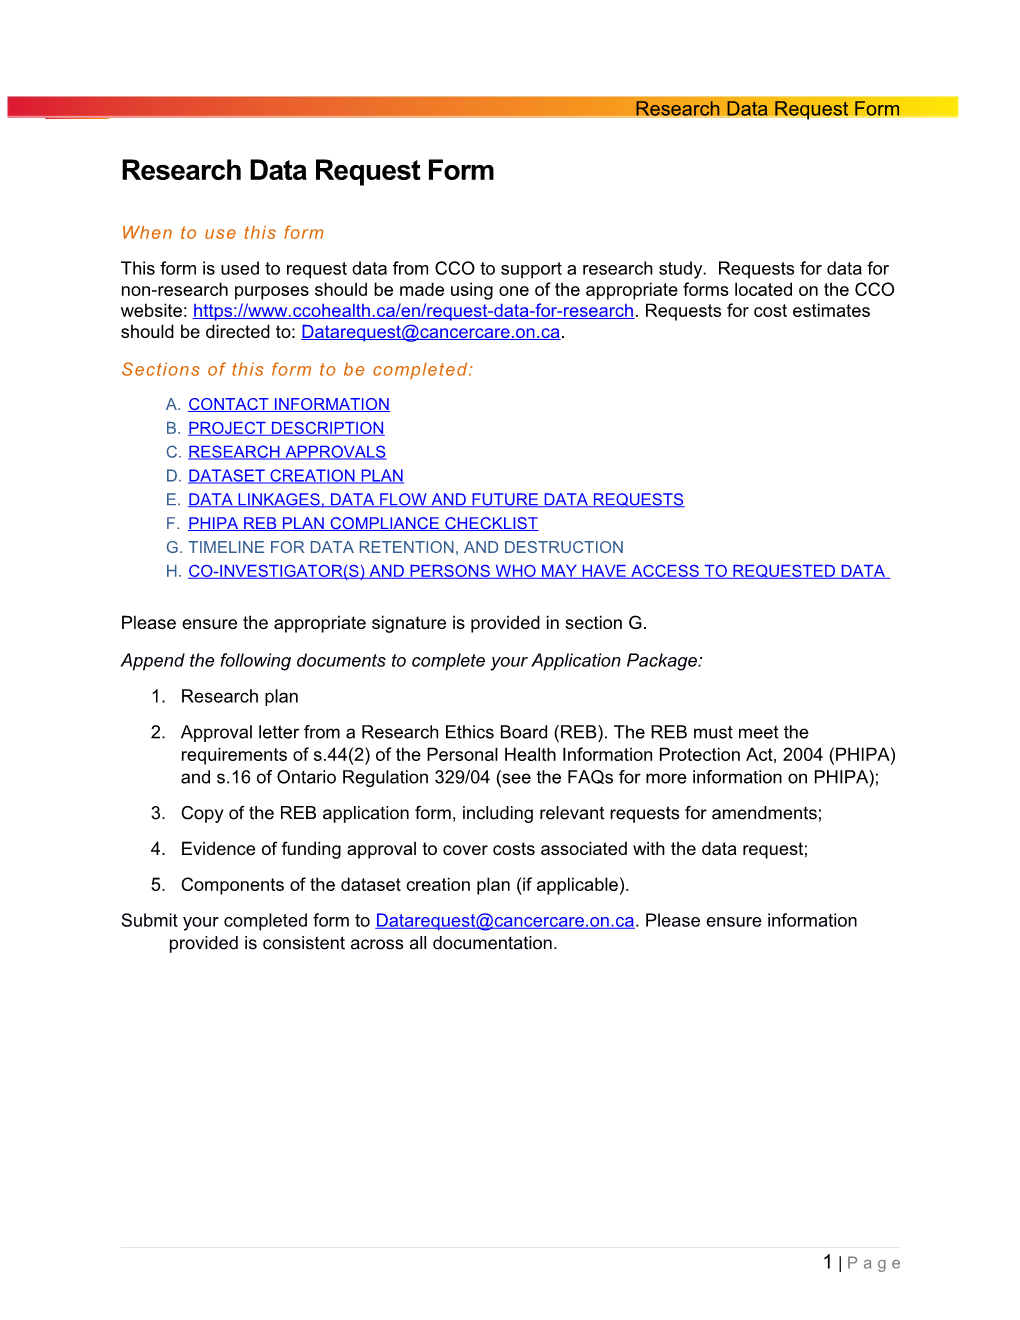 Research Data Request Form